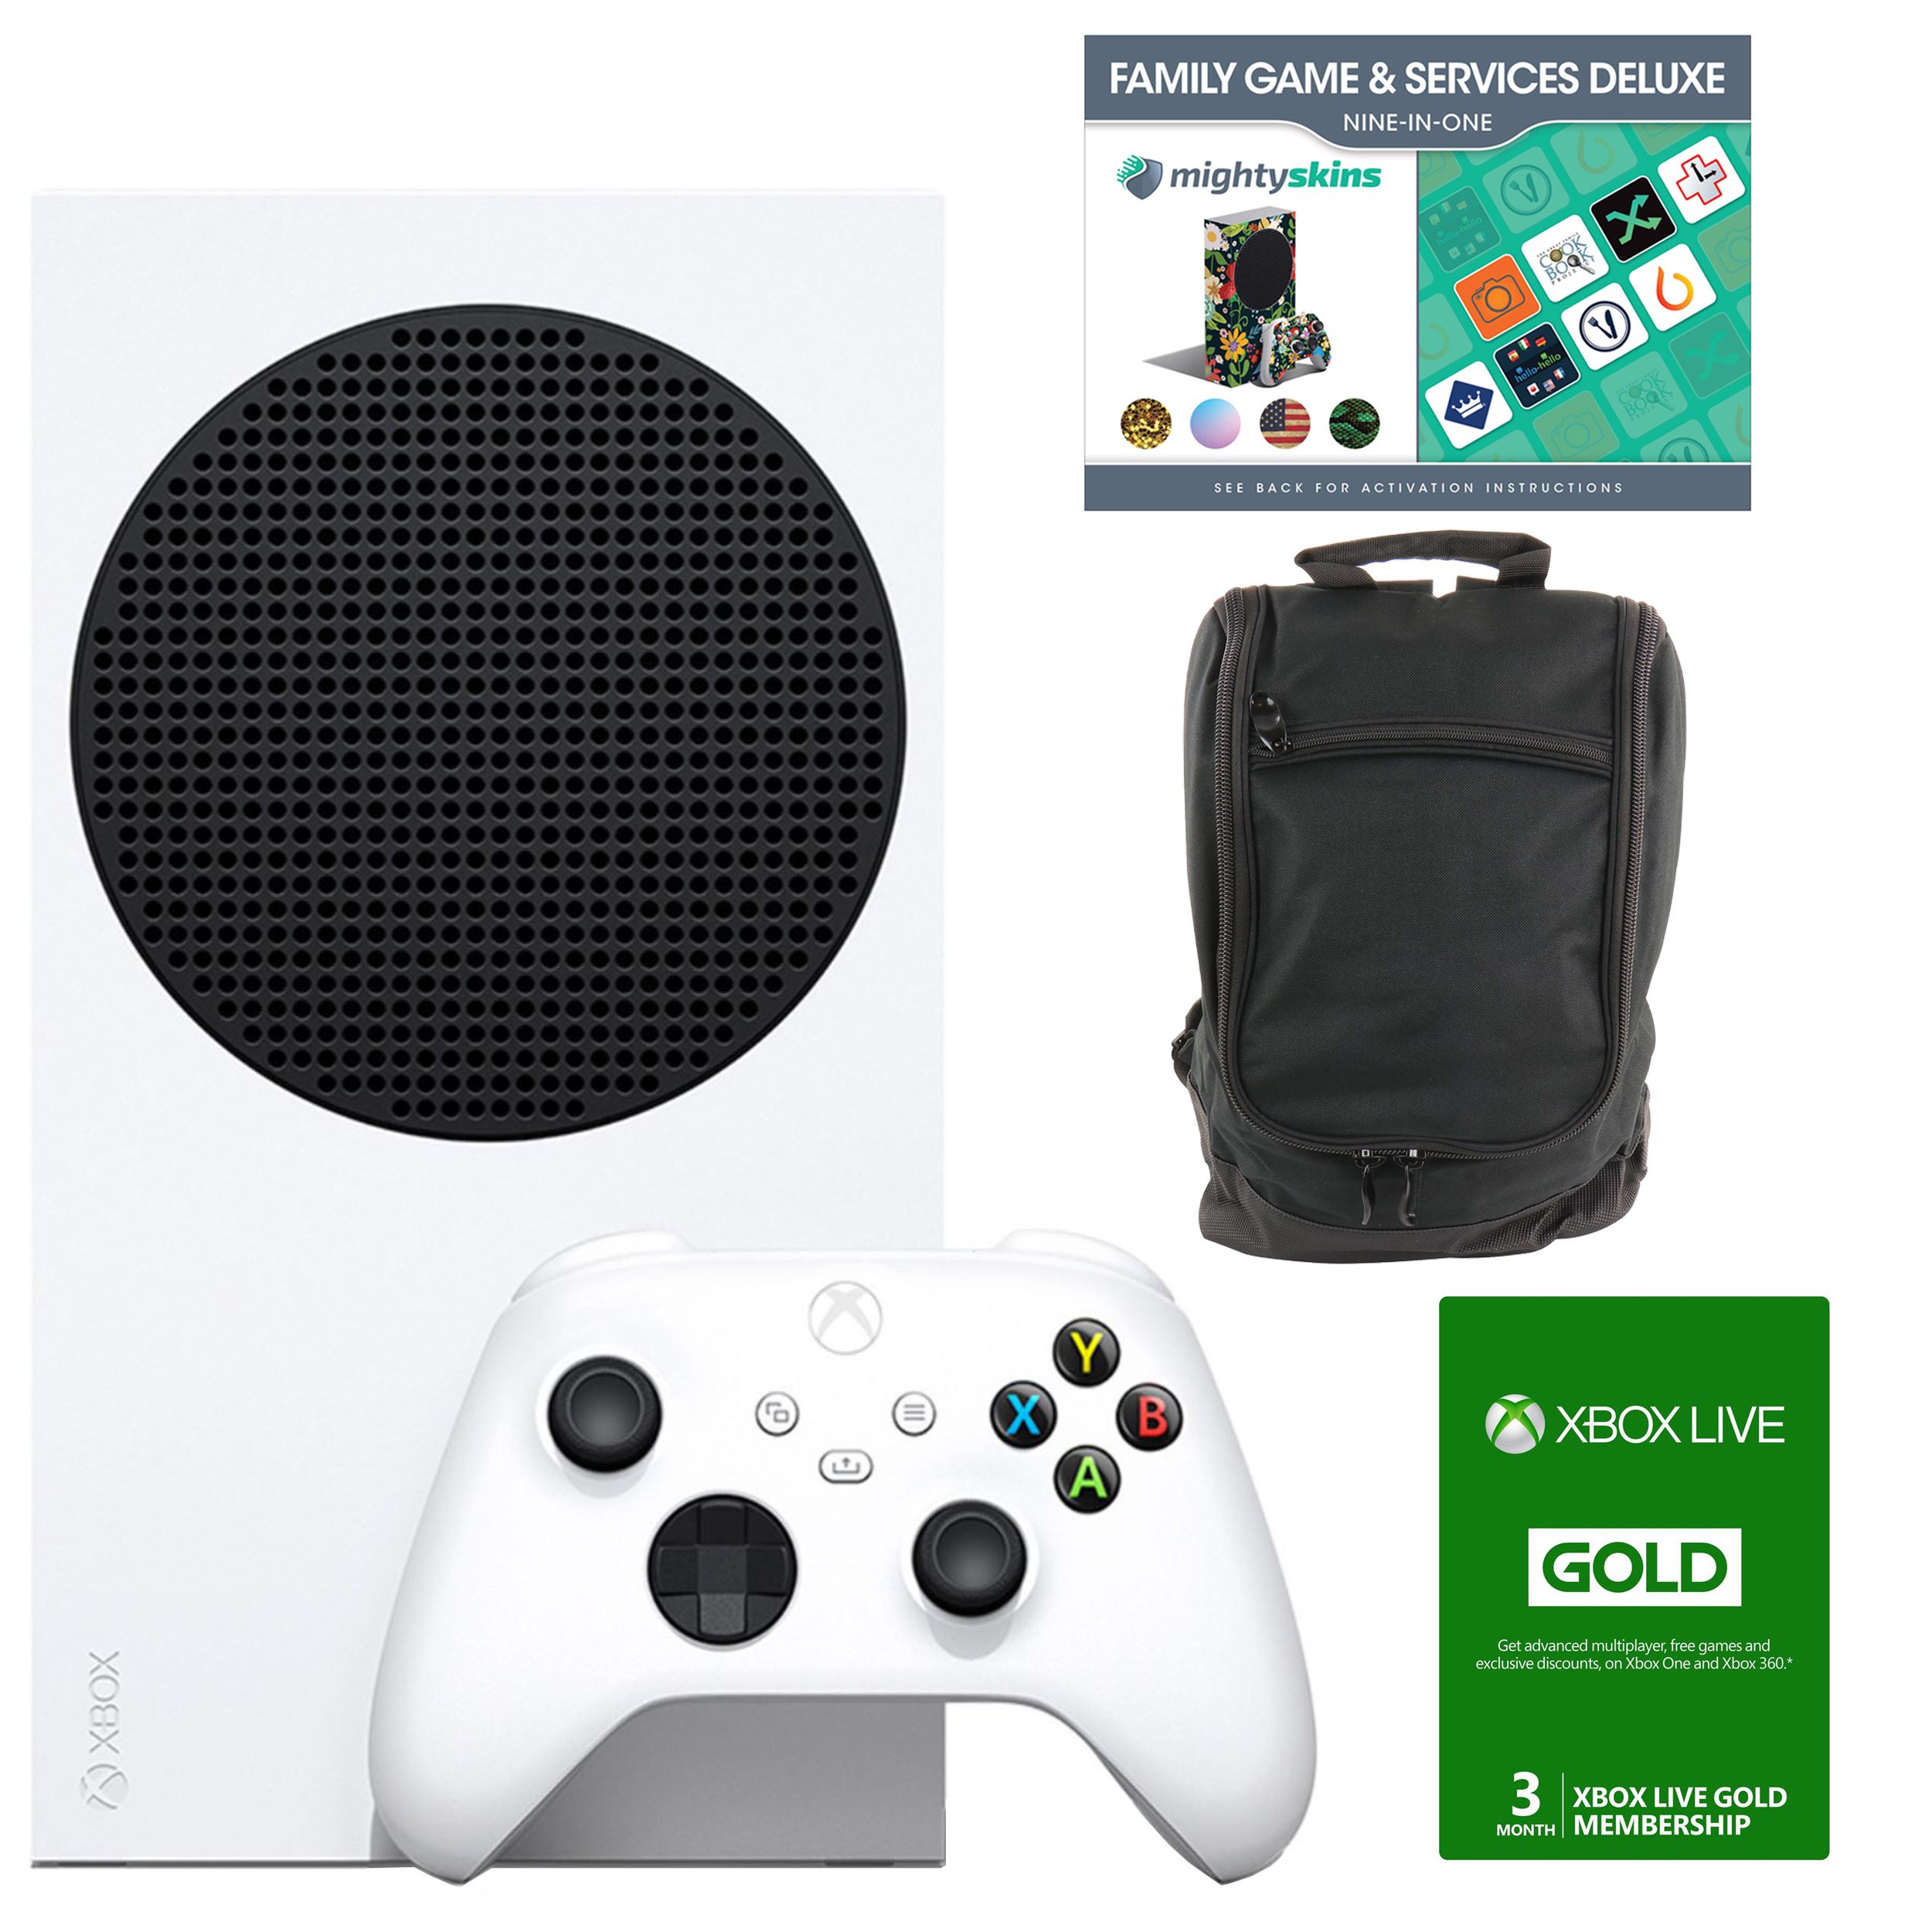 Kostuums Vreemdeling Namaak Fingerhut - Microsoft Xbox Series S Digital Console Bundle with Carry Bag  and 3-Month Xbox Live Membership and Family Services Voucher